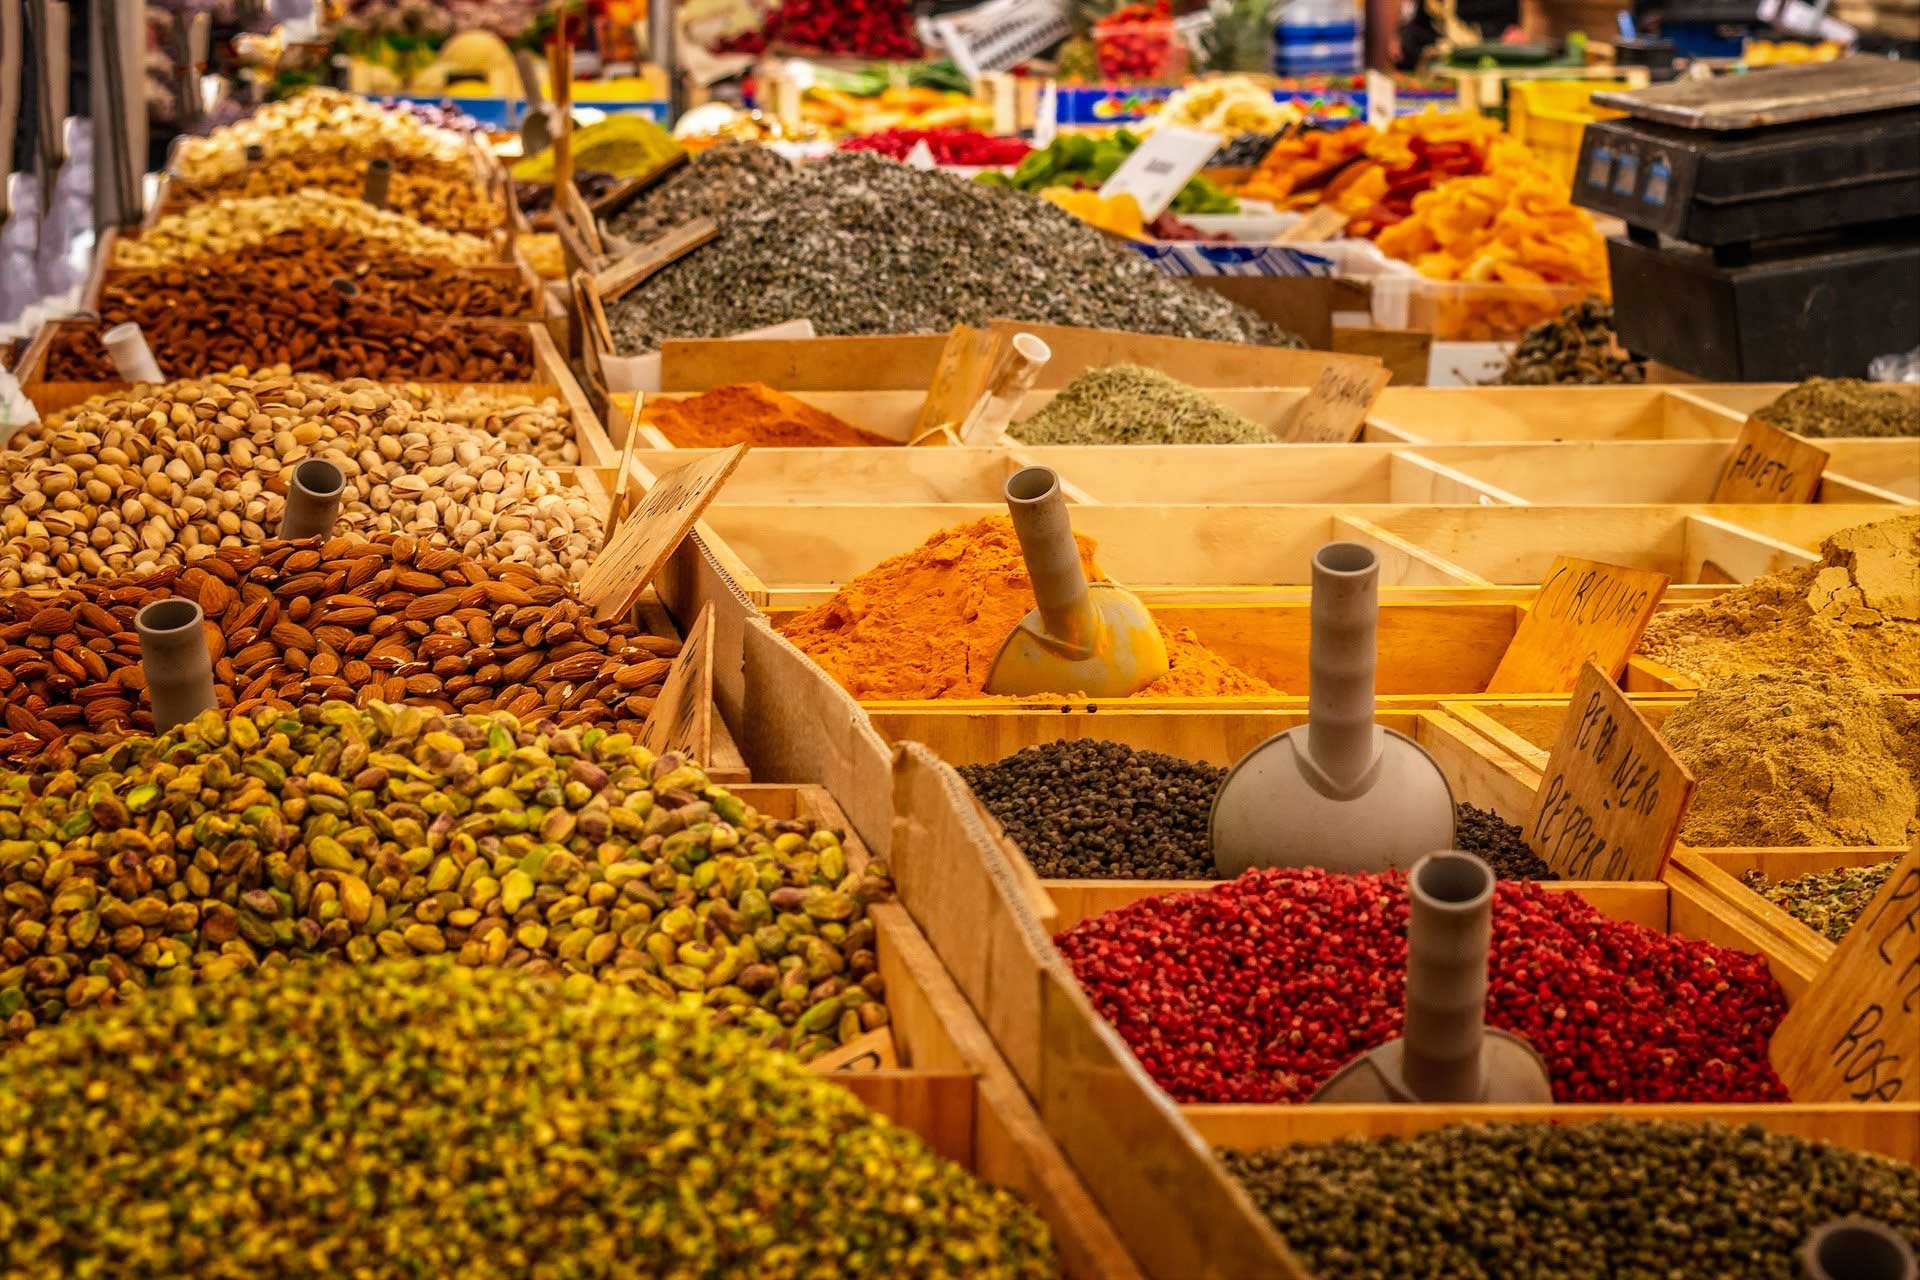 Whole spices from Kerala